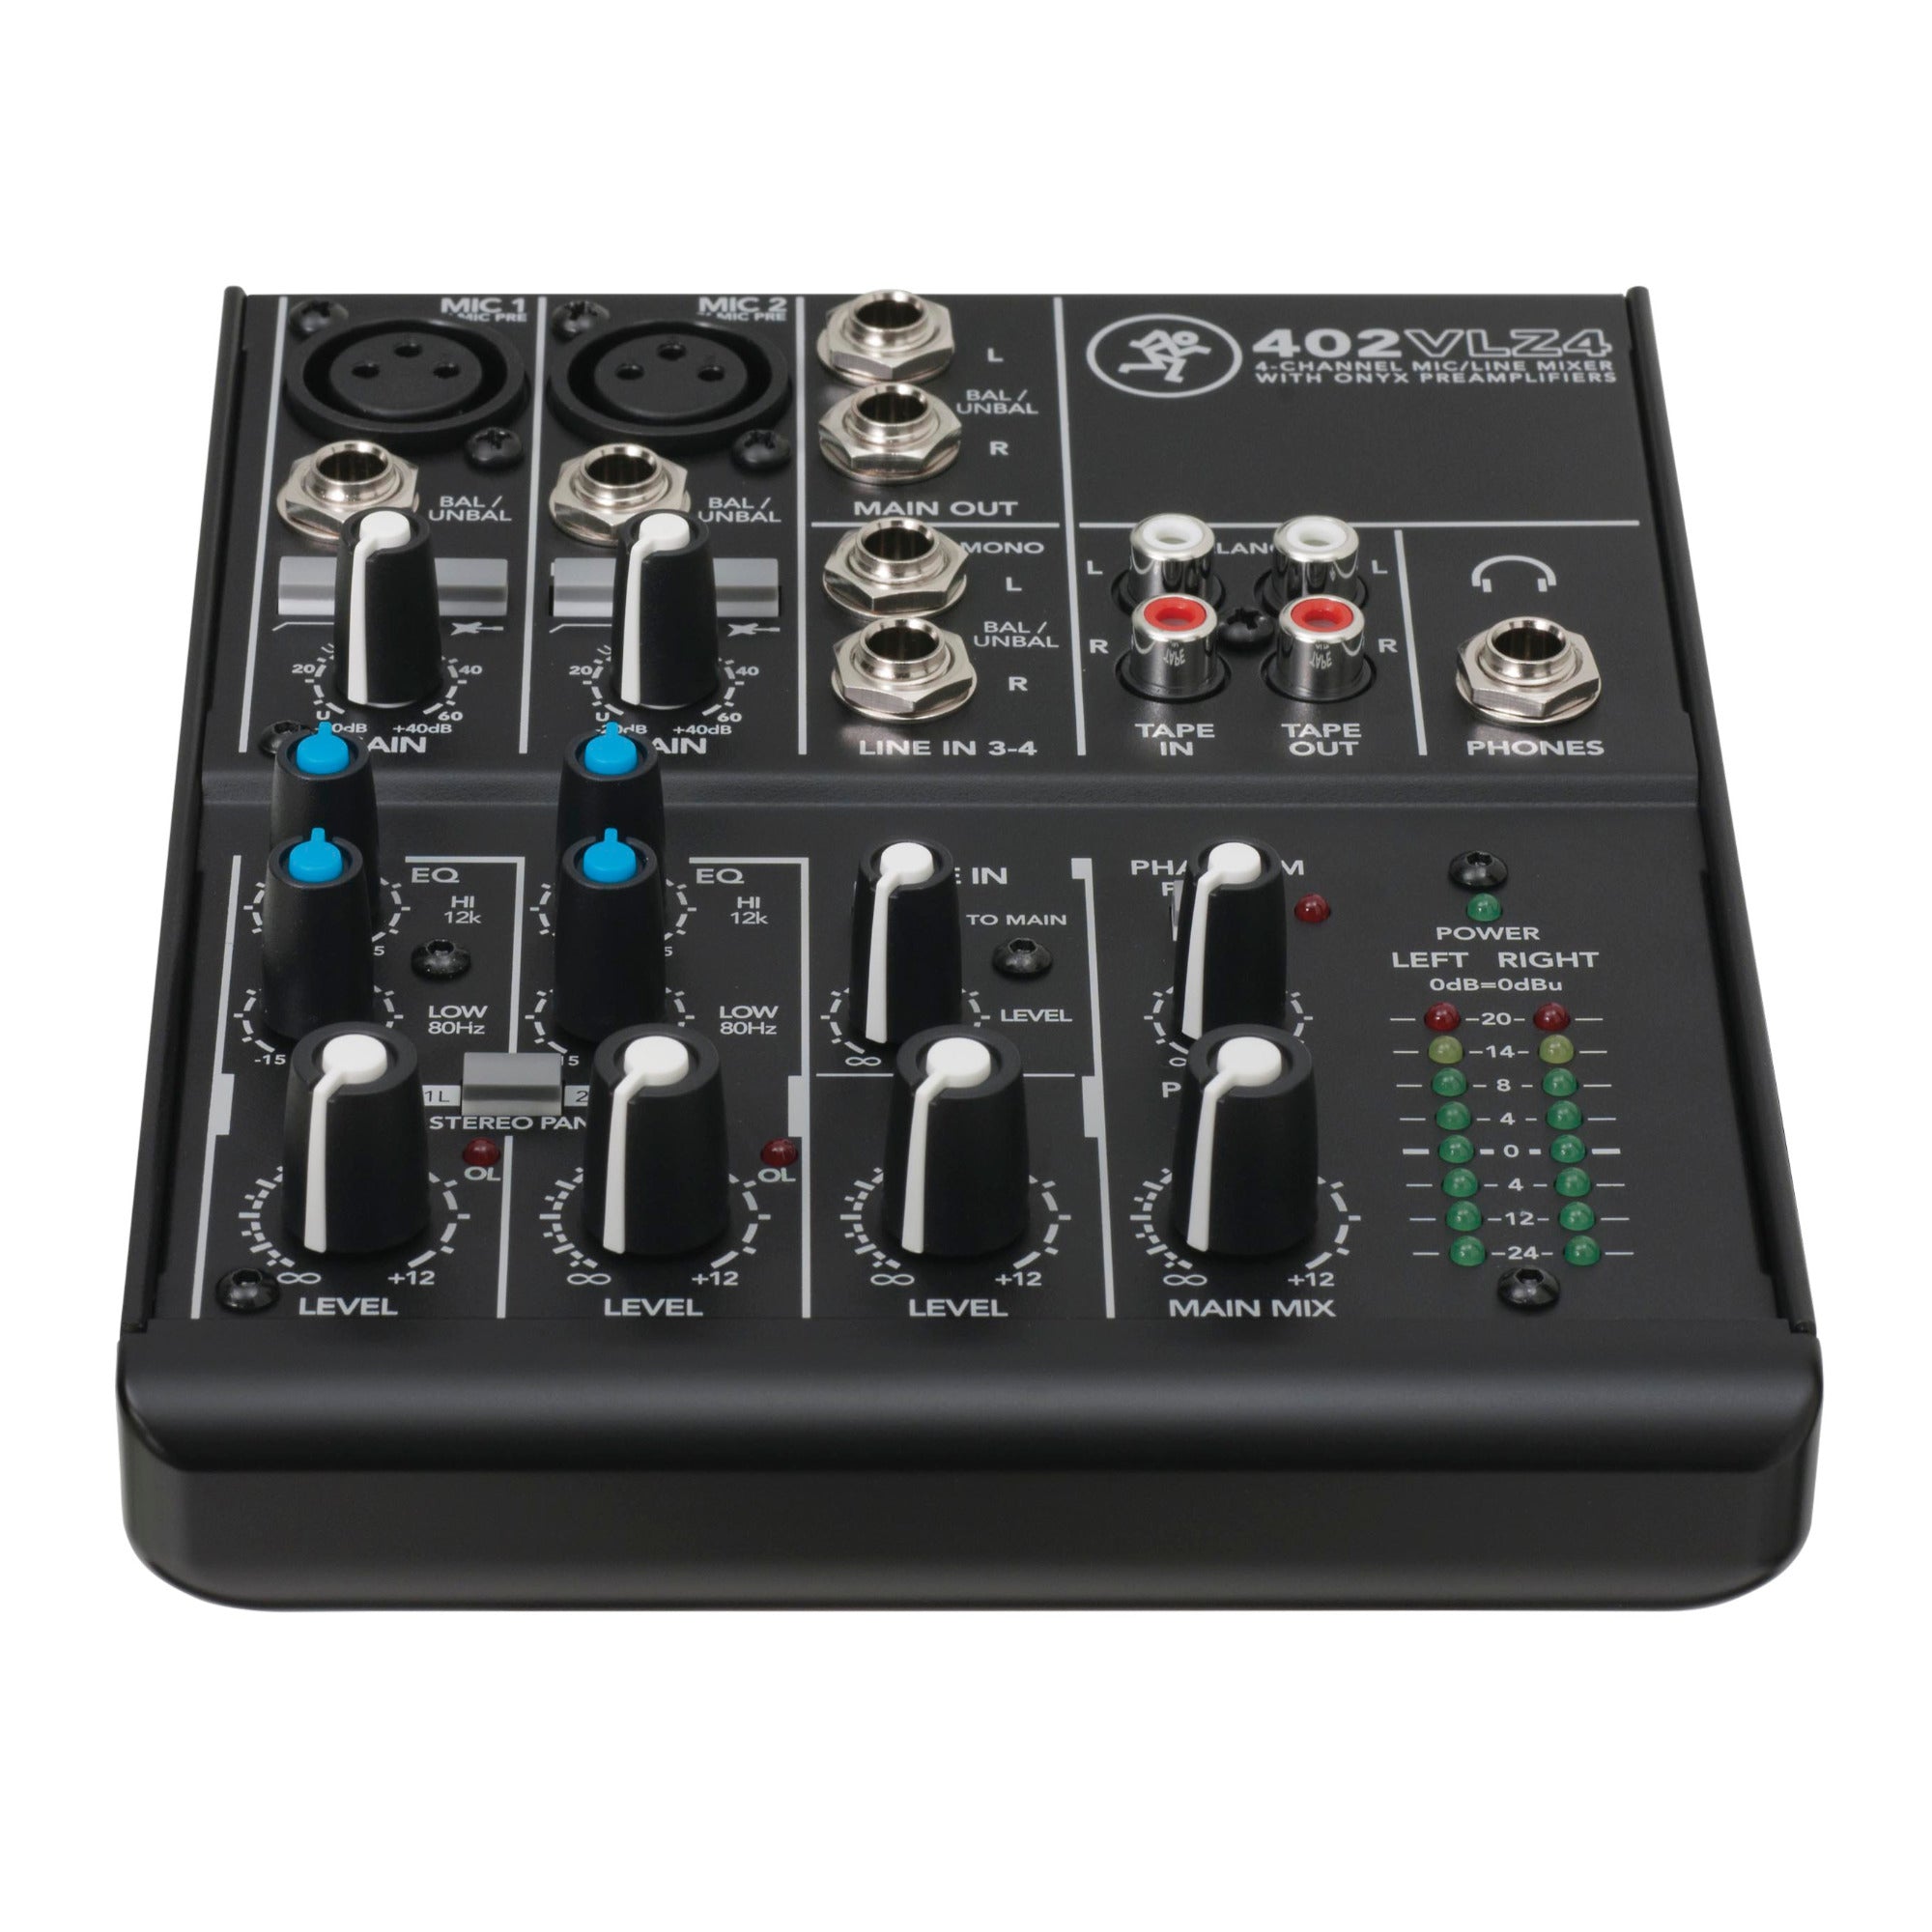 Mackie 402VLZ4 4-channel Compact Analog Mixer